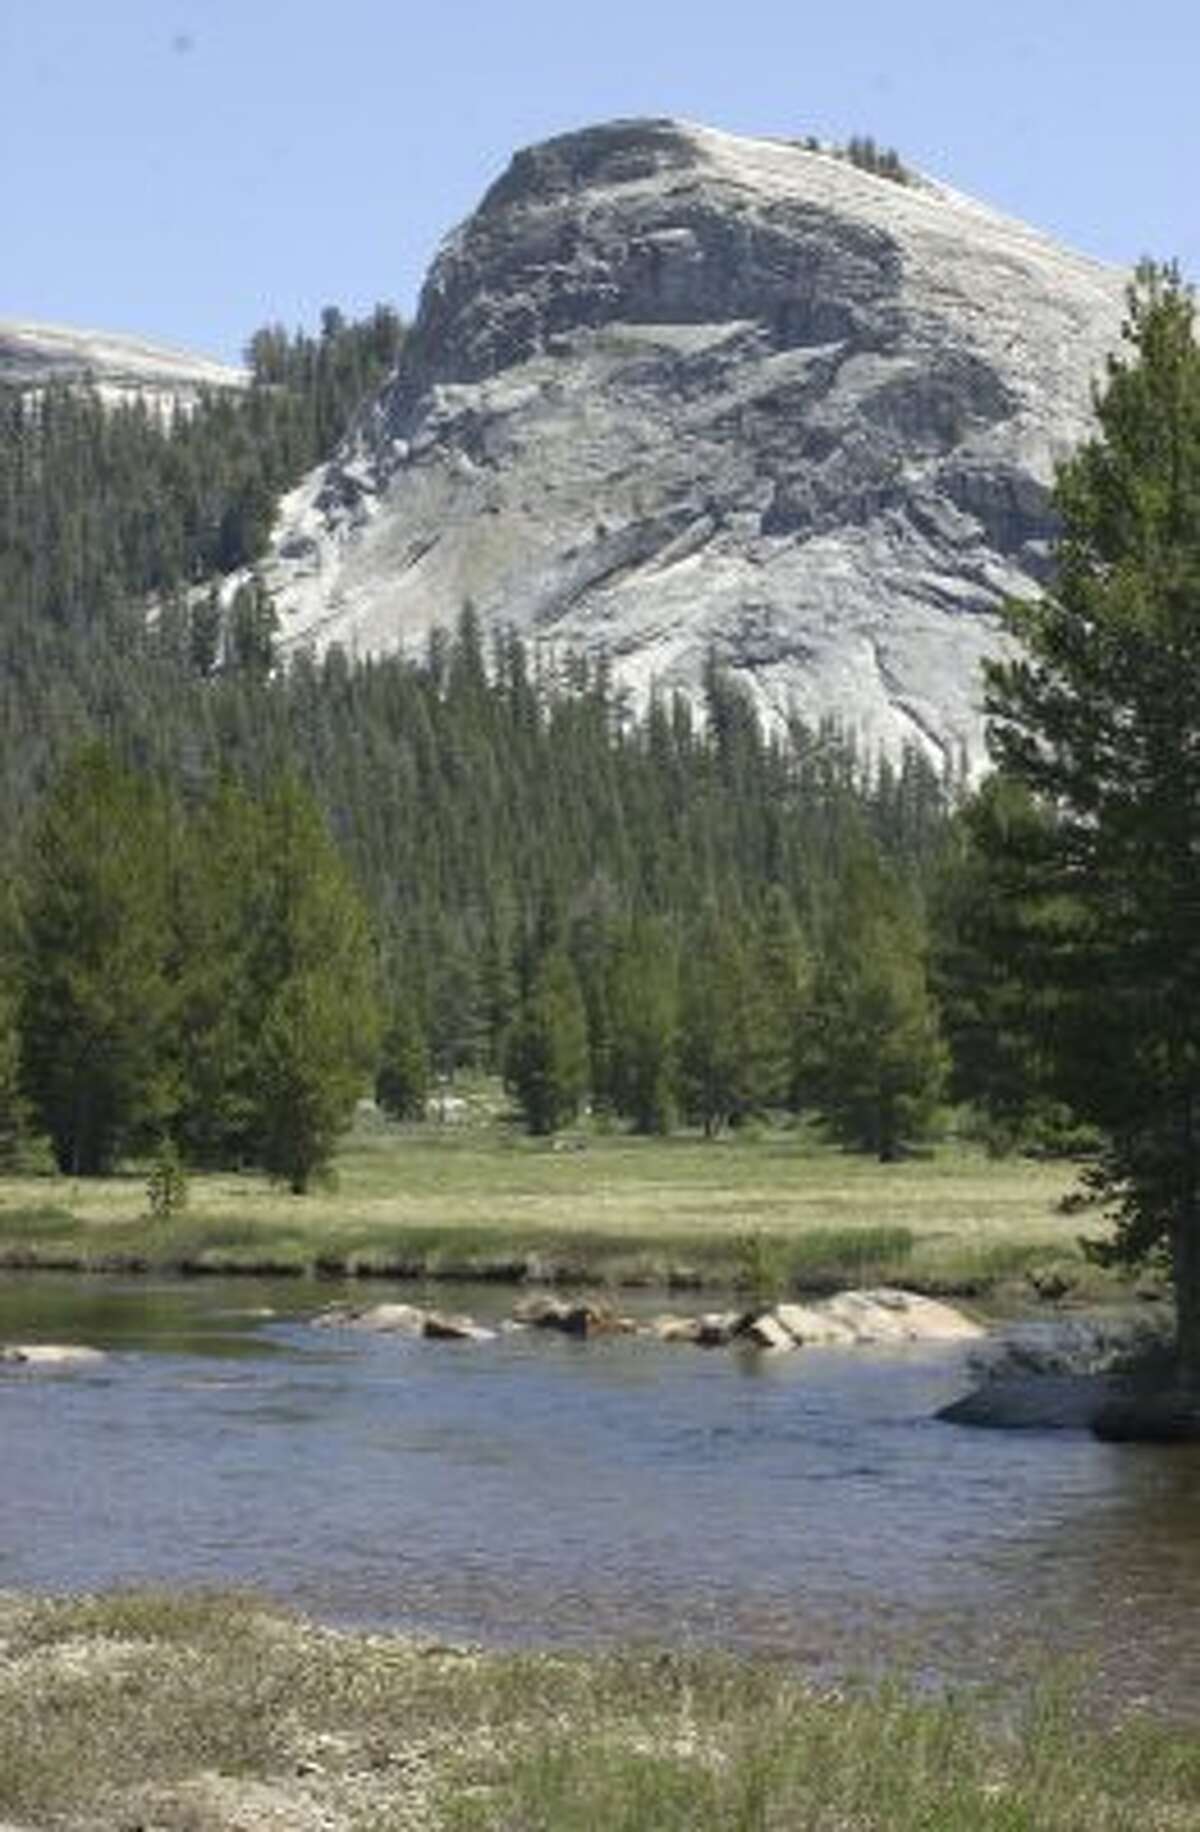 A view of Lembert Dome and the Tuolomne River in Tuolumne Meadows at Yosemite National Park. A rock climber who had just proposed to his girlfriend fell 300 feet to his death while climbing alone in the Tuolumne Meadows on Saturday.